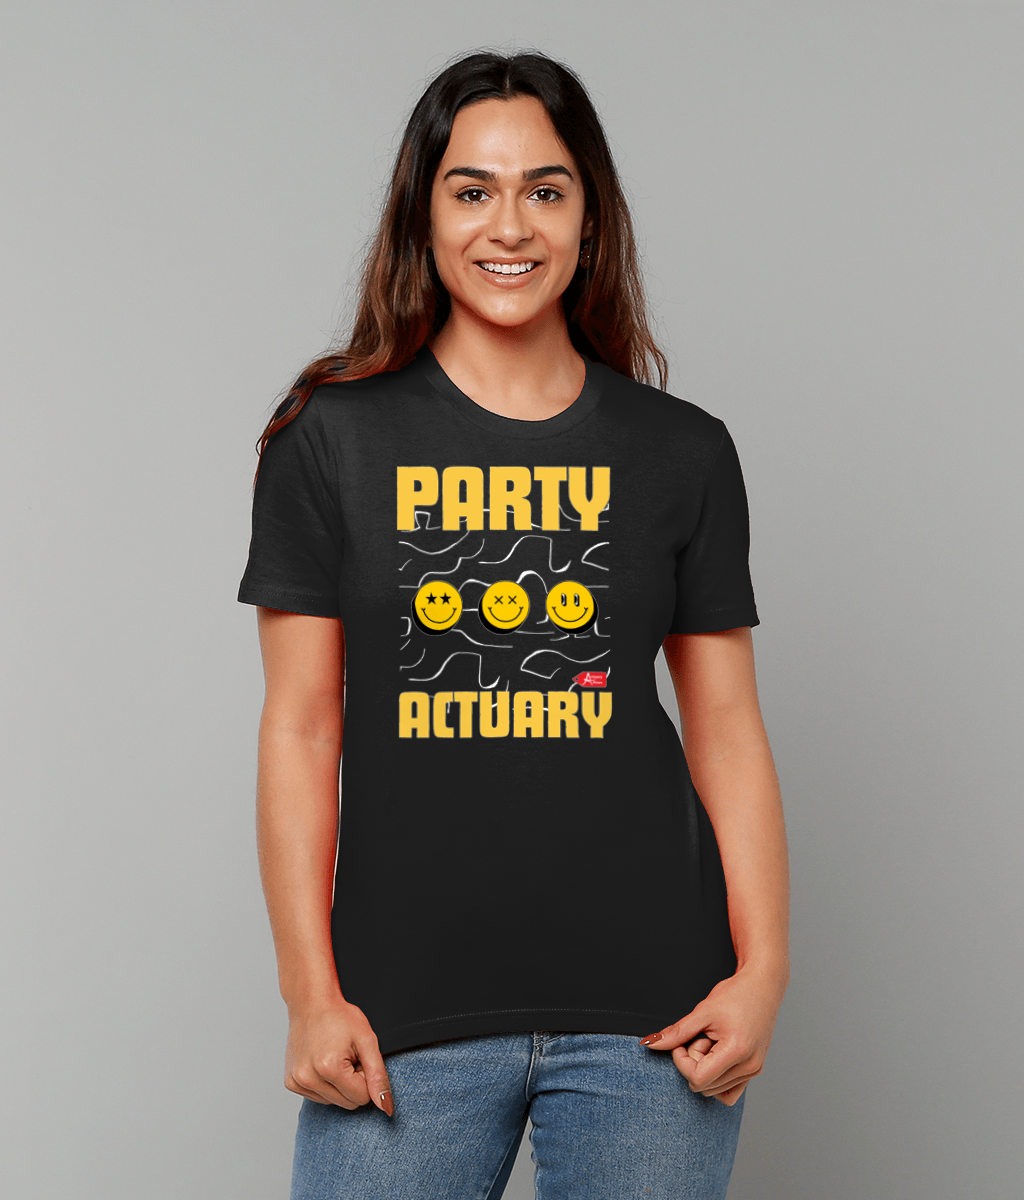 Party Actuary Smile Stickers Black T-Shirt